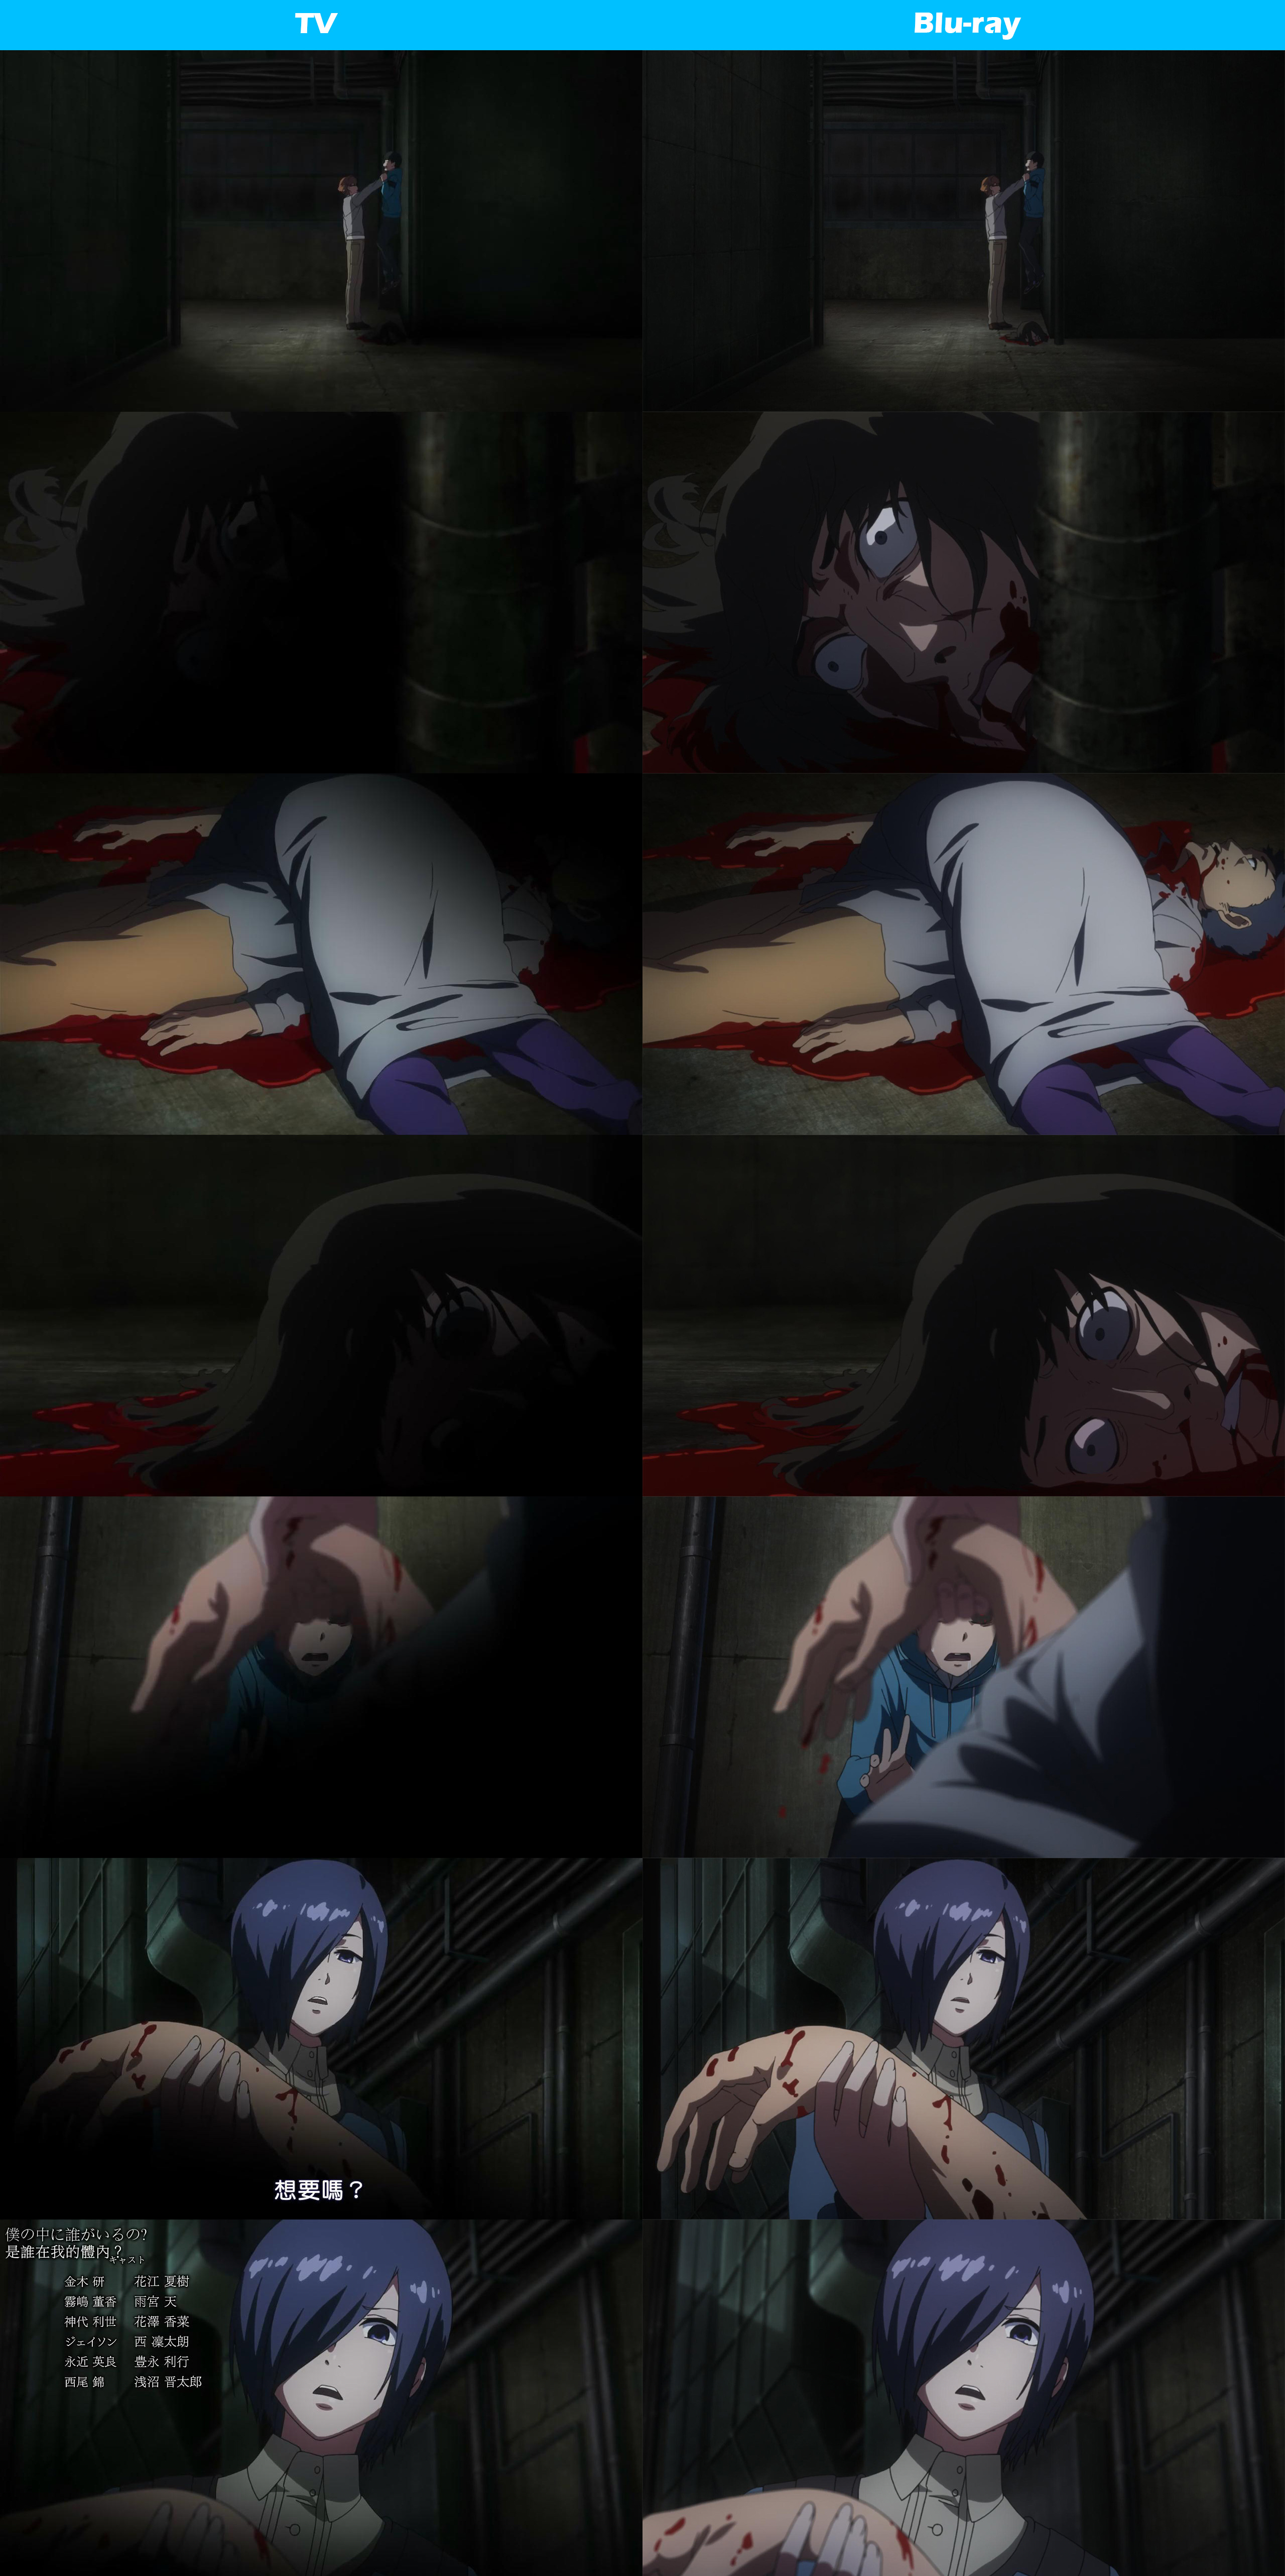 Tokyo-Ghoul---TV-and-Blu-ray-Comparison-Image-2